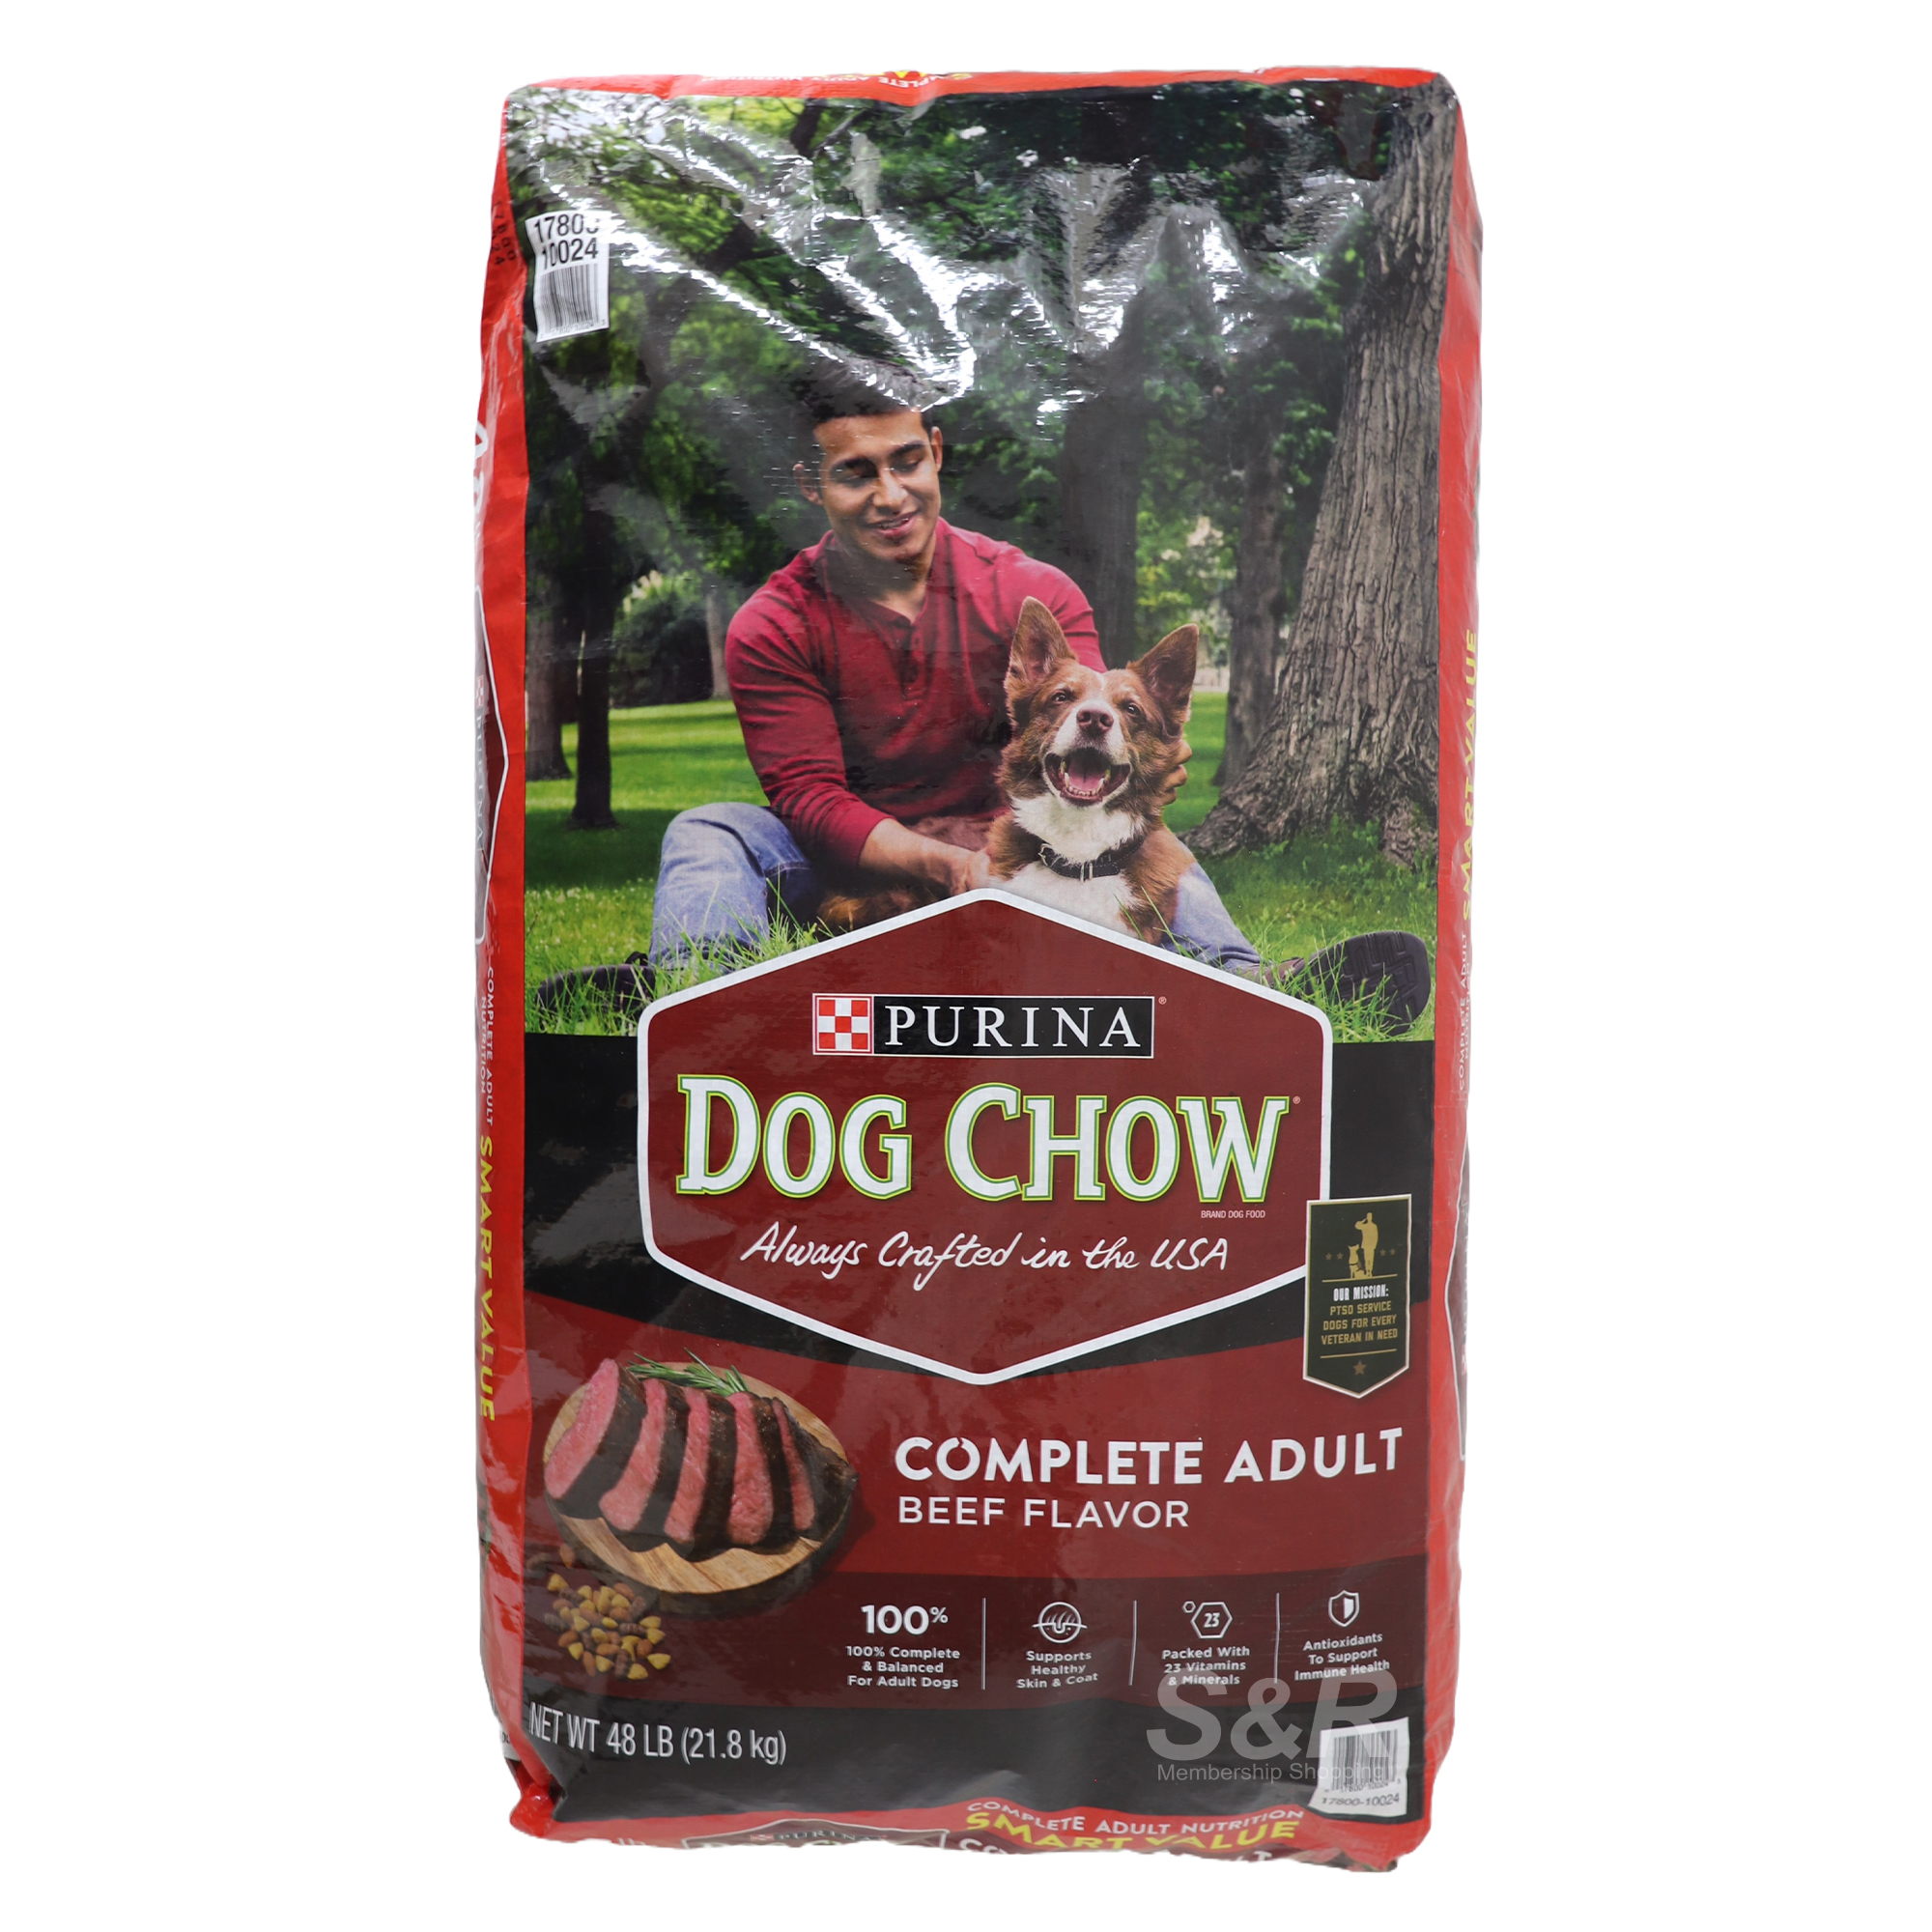 Purina Dog Chow Food for Adult Dogs Beef Flavor 21.8kg